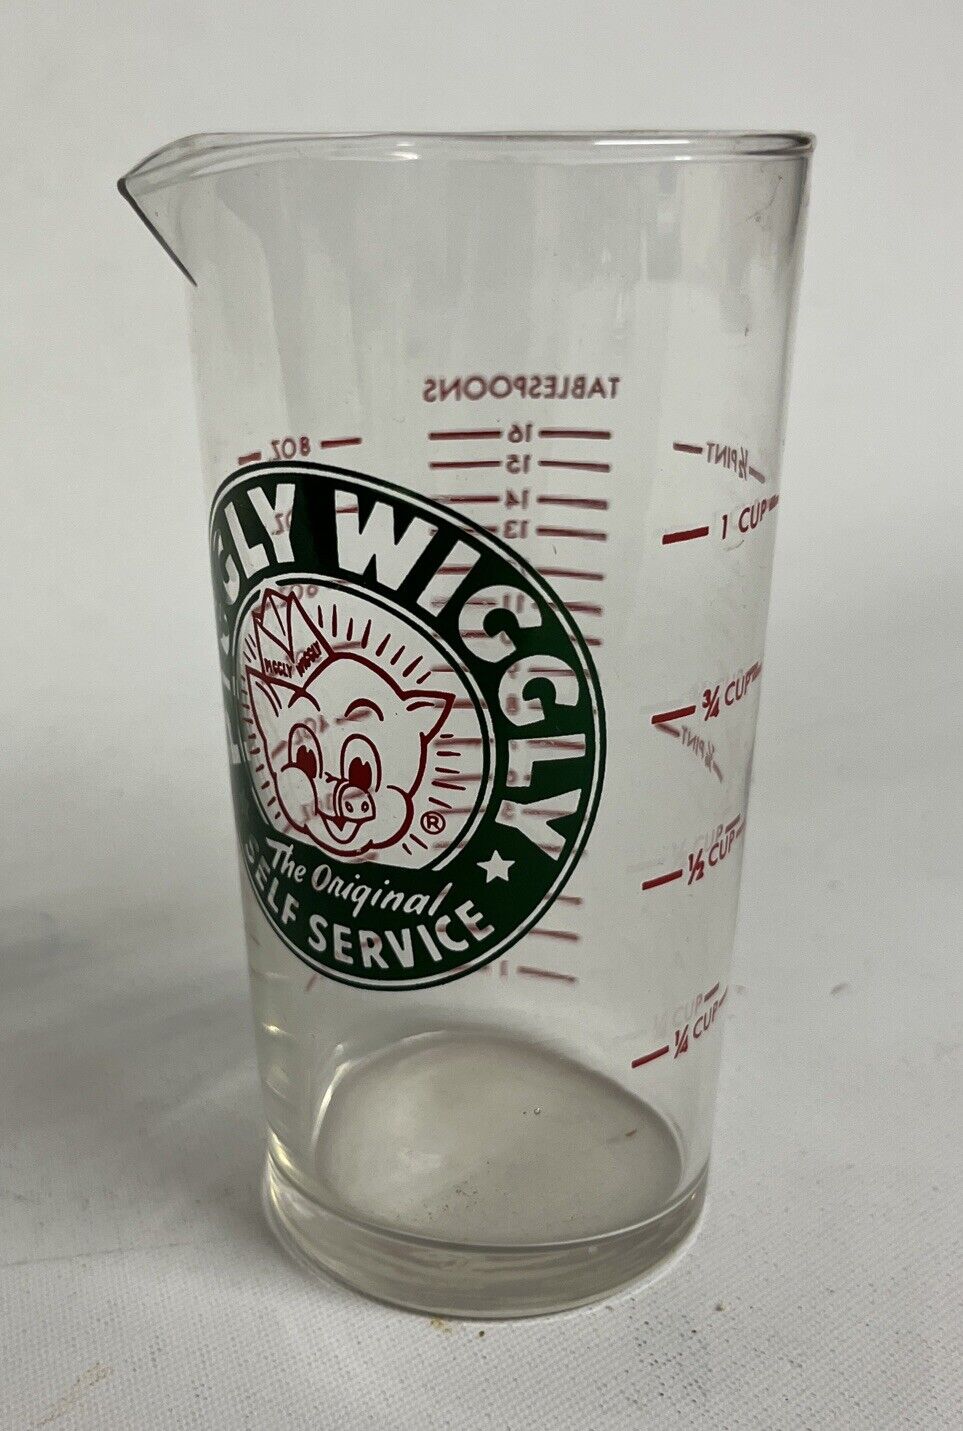 Vintage Piggly Wiggly Glass Measuring Cup Vintage 8 Oz 16 Tablespoons One Cup